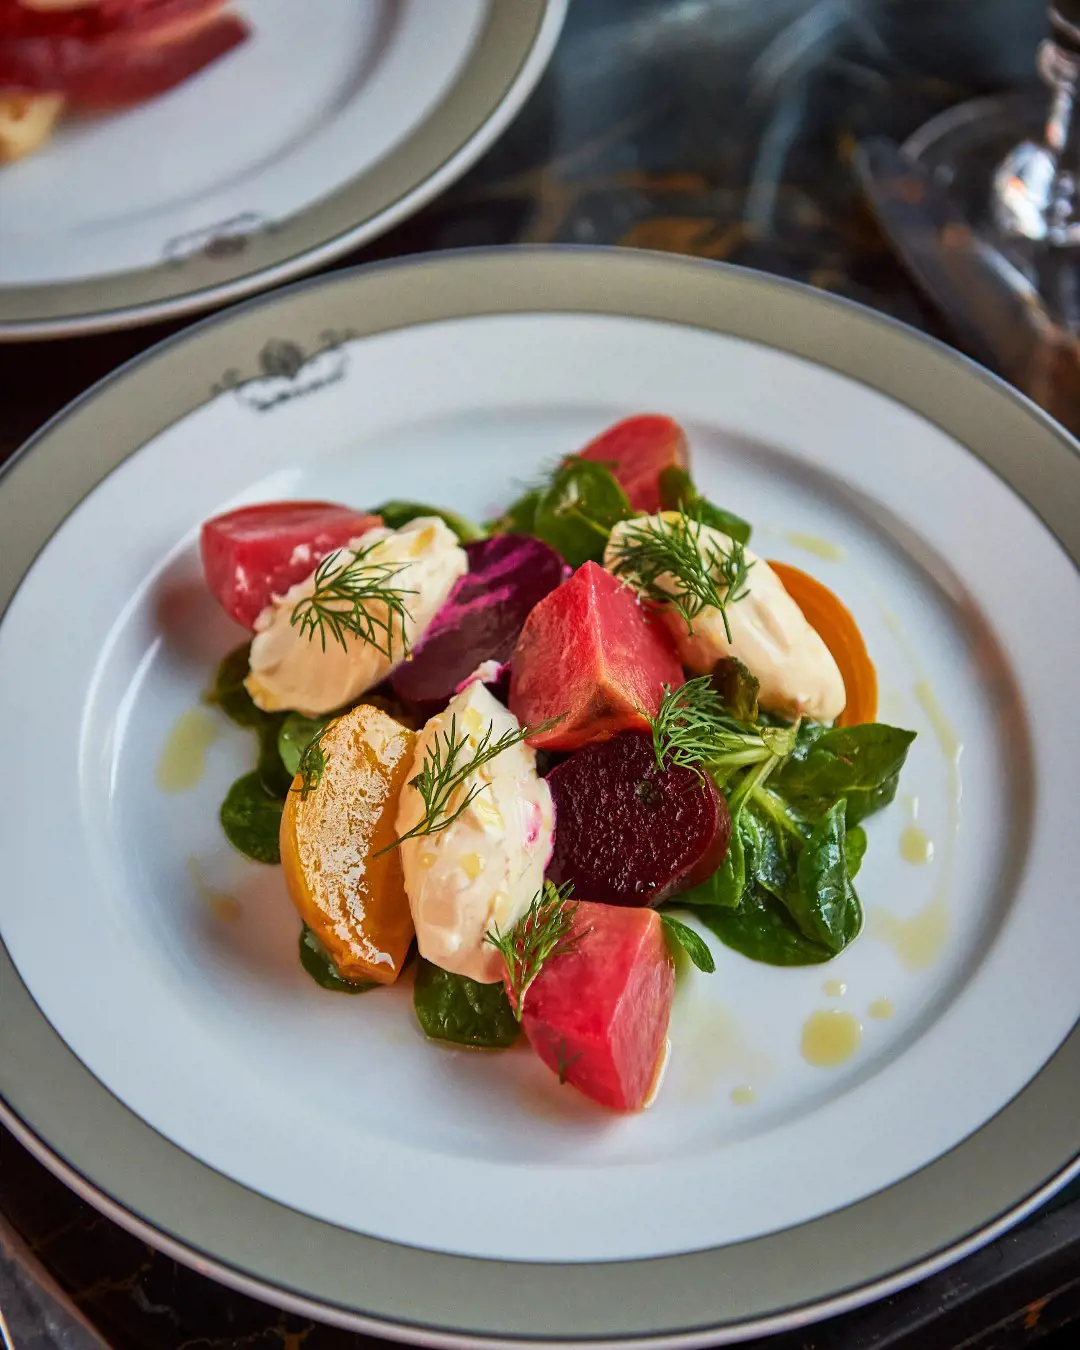 Heritage Beetroots, Mâche and Goats’ Curd Salad